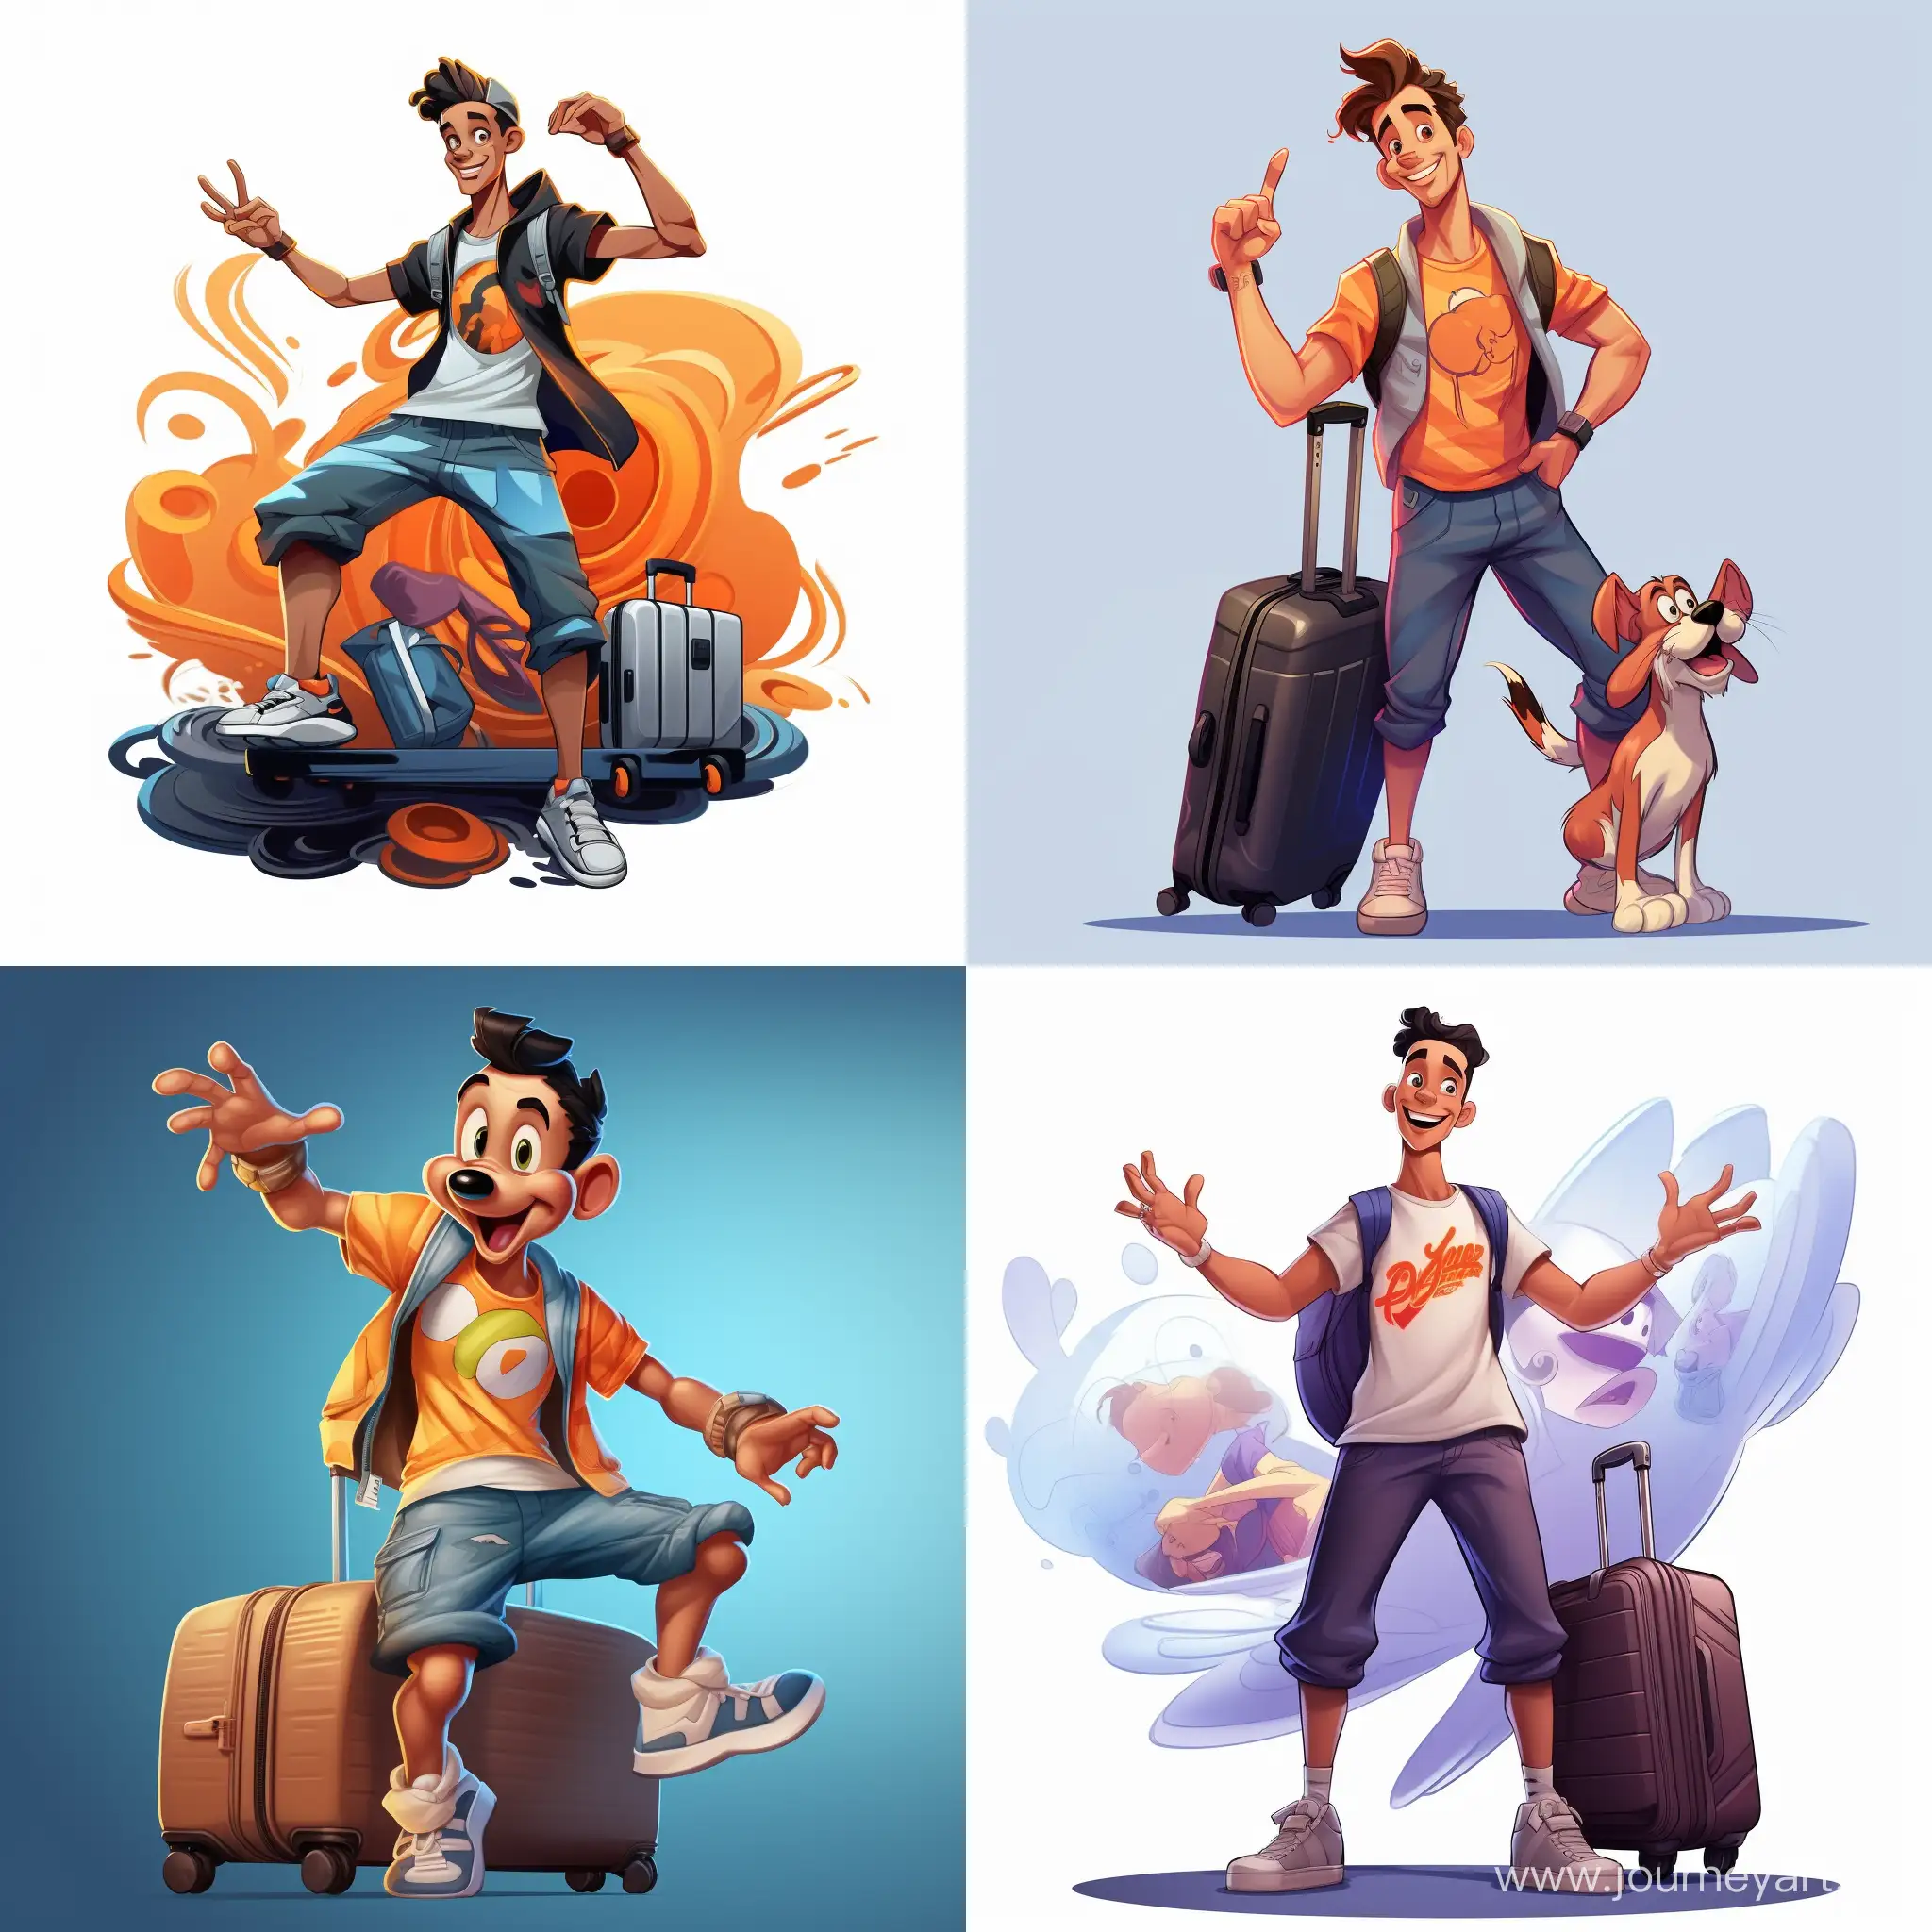 Playful-Goofy-Cartoon-Character-Poses-with-Stylish-Nike-Sneakers-and-Suitcase